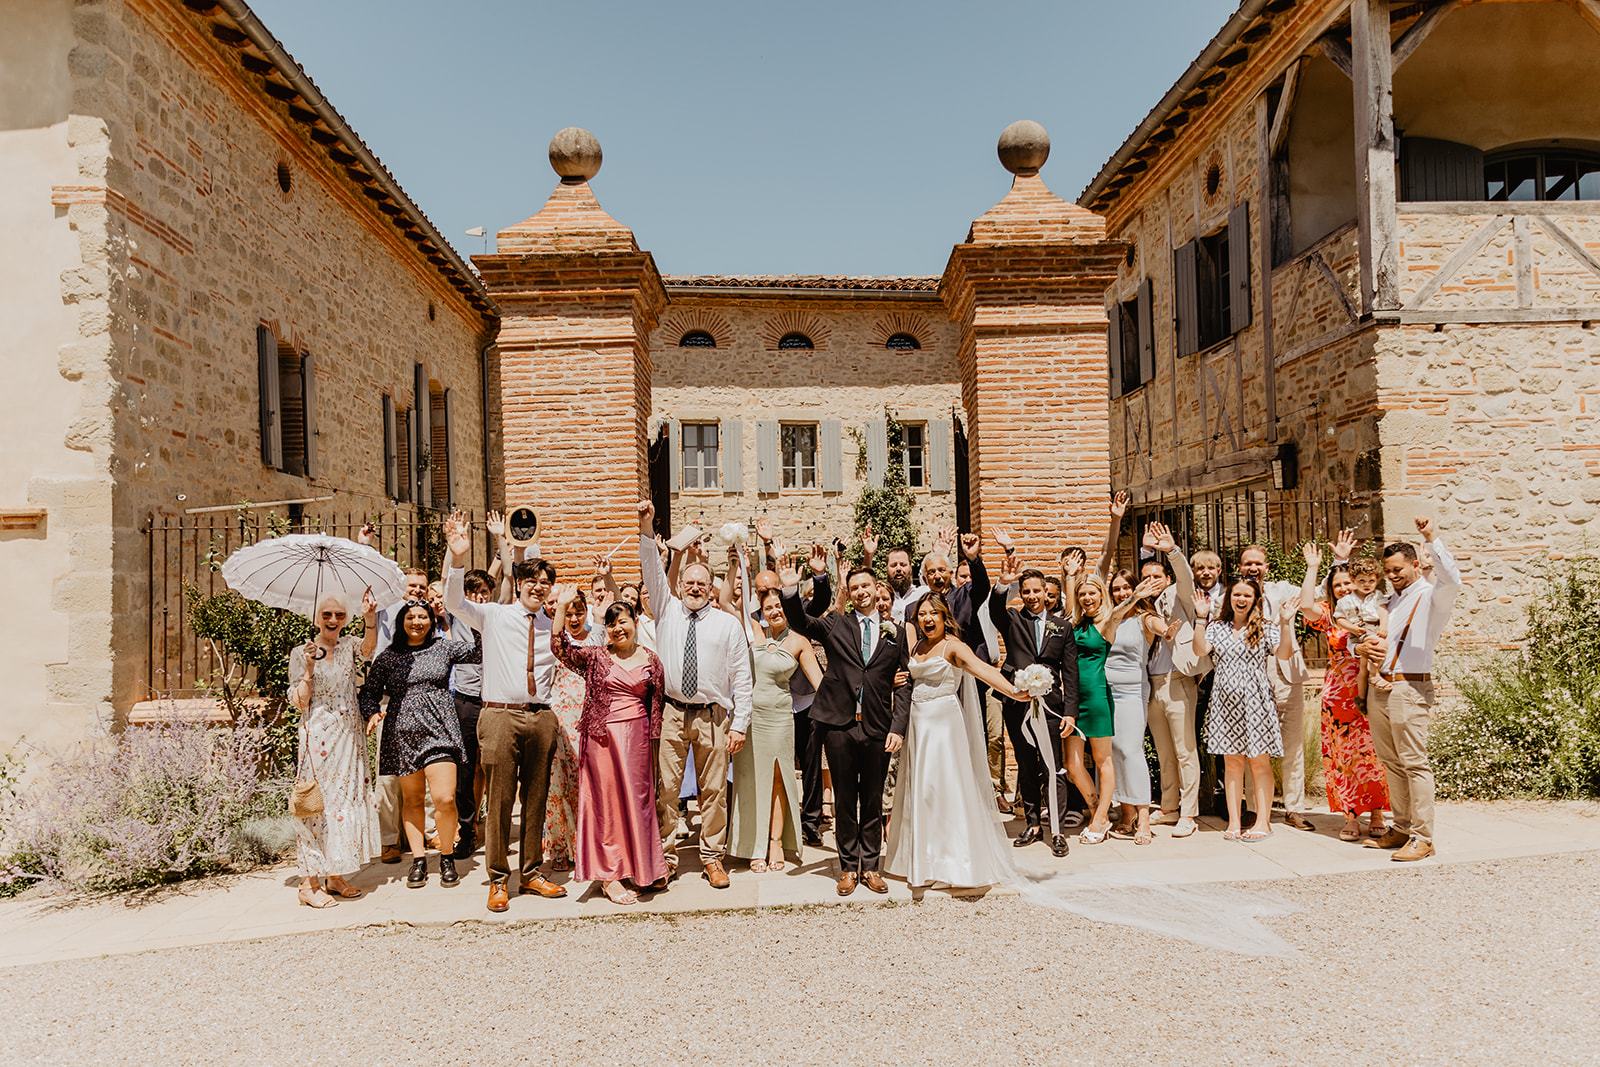 Wedding guests group photo at a Destination Wedding in France. Photography & Videography by OliveJoy Photography